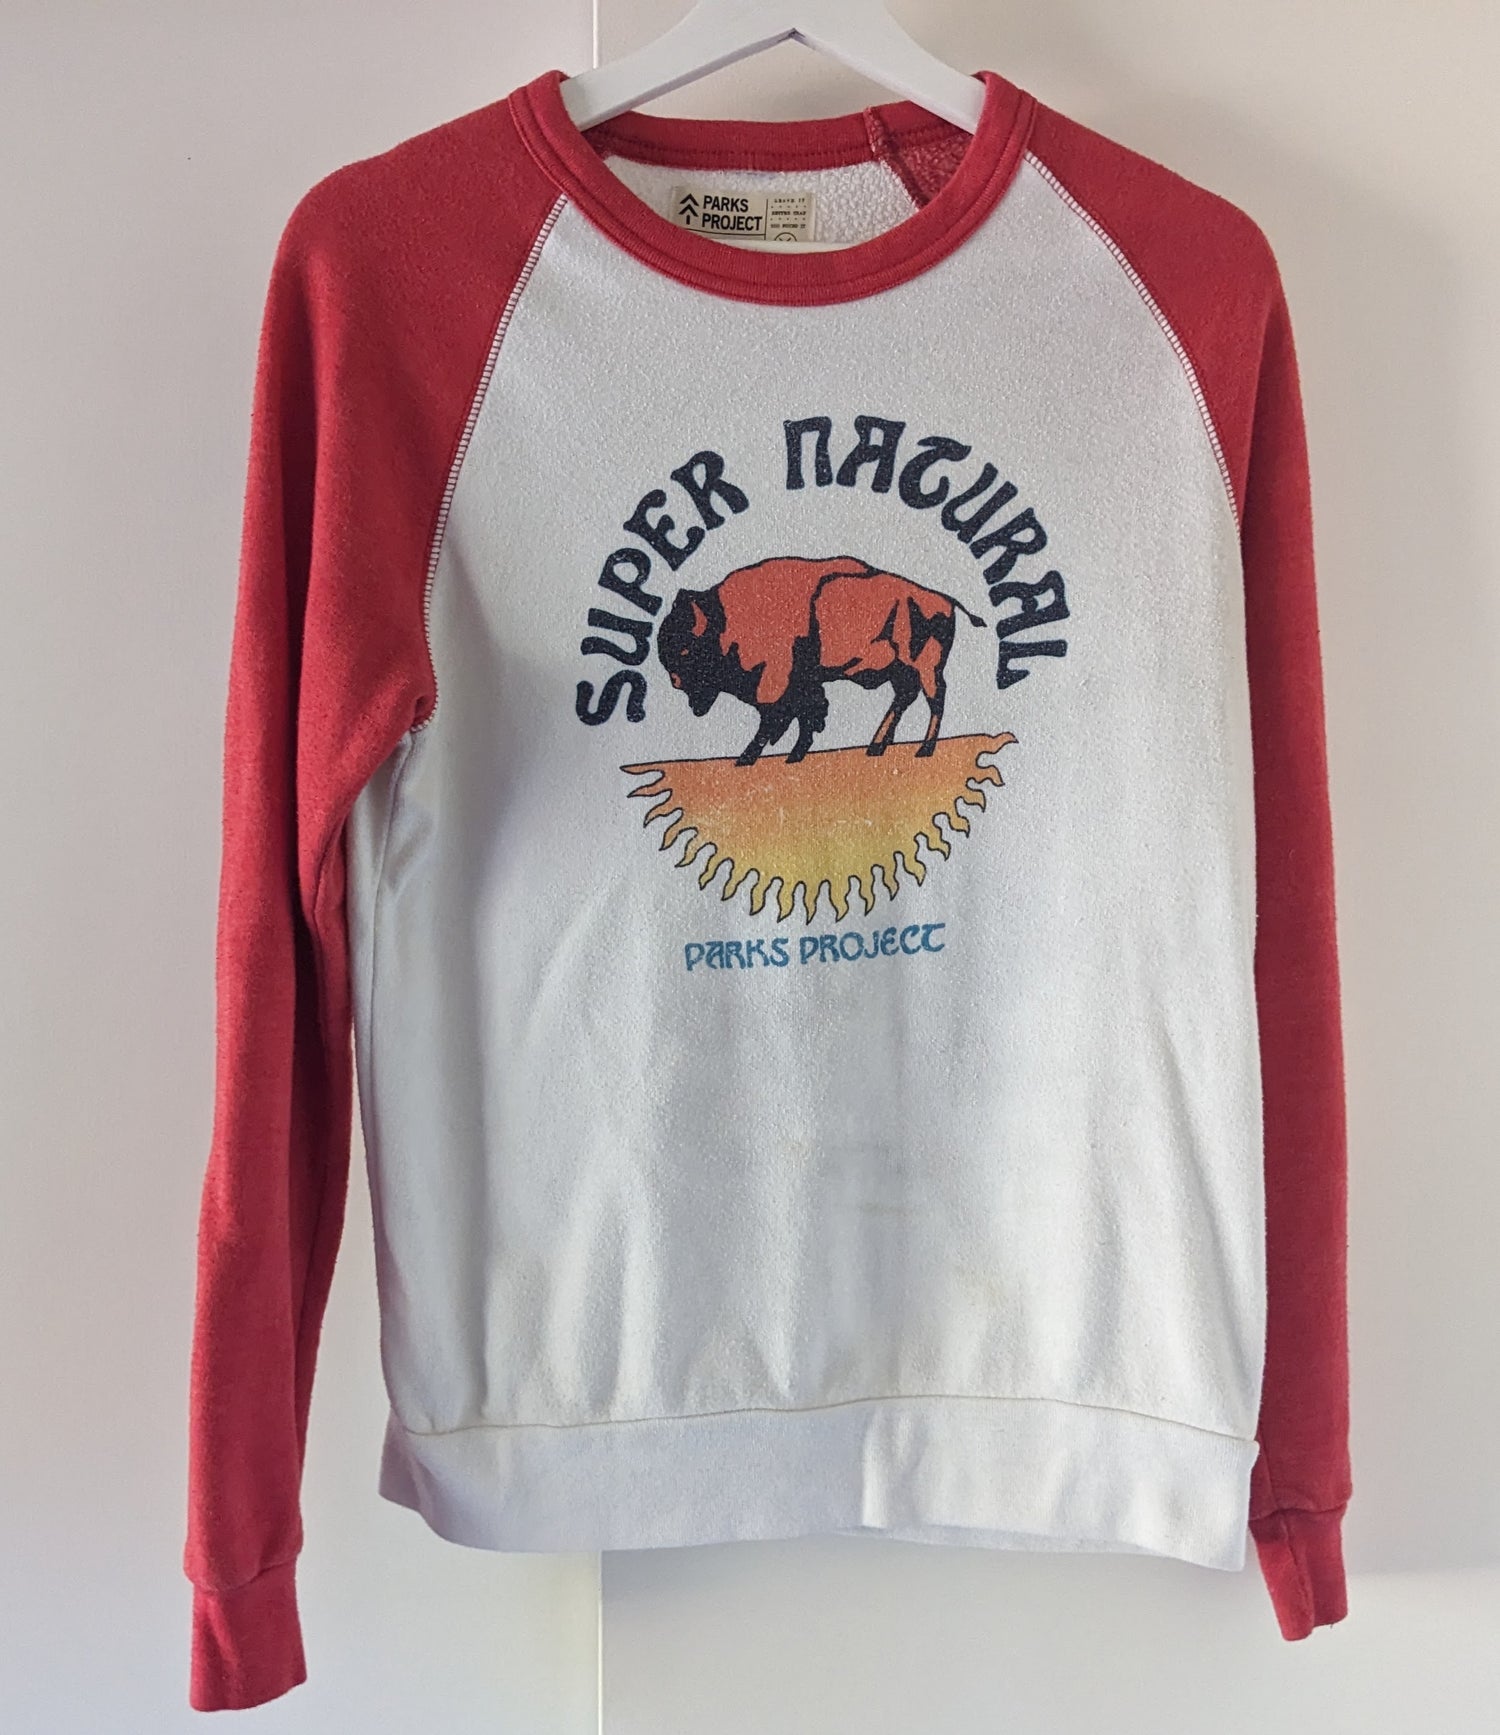 White and Red Parks Project Super Natural Bison fleece long sleeve shirt